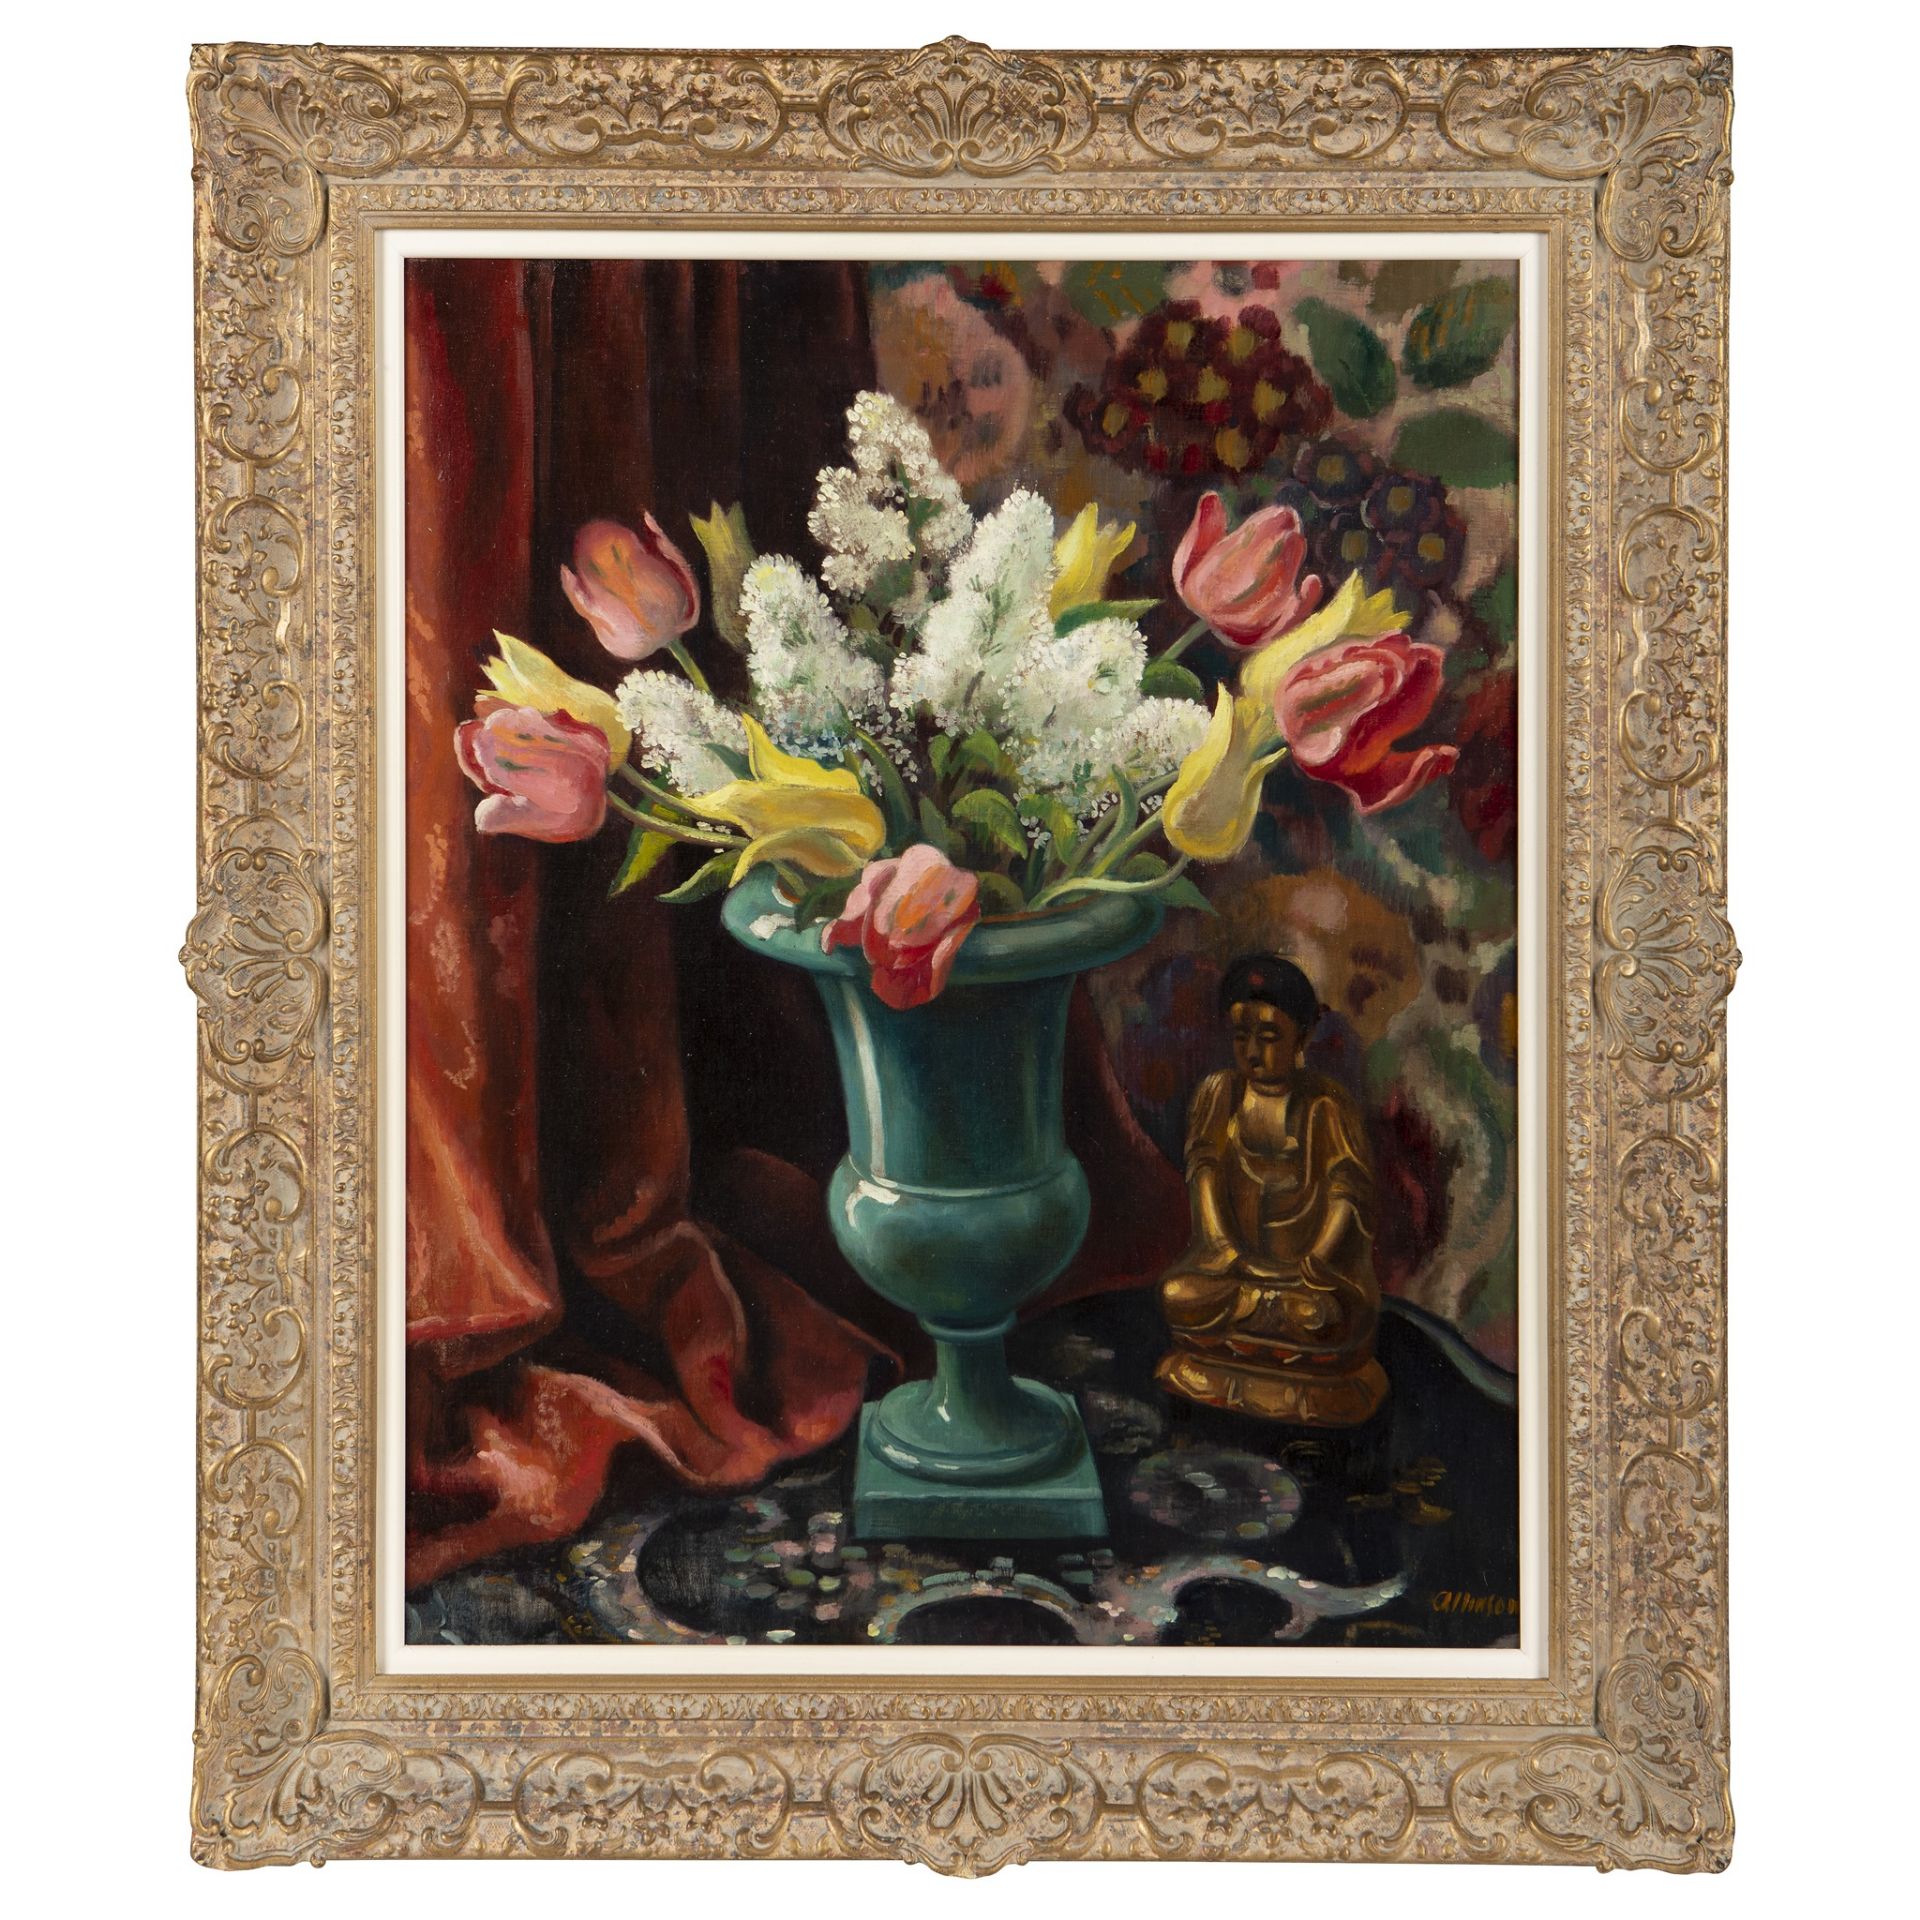 § ADRIAN ALLINSON (BRITISH 1890-1959) STILL LIFE WITH FLOWERS AND STATUE - Image 3 of 5